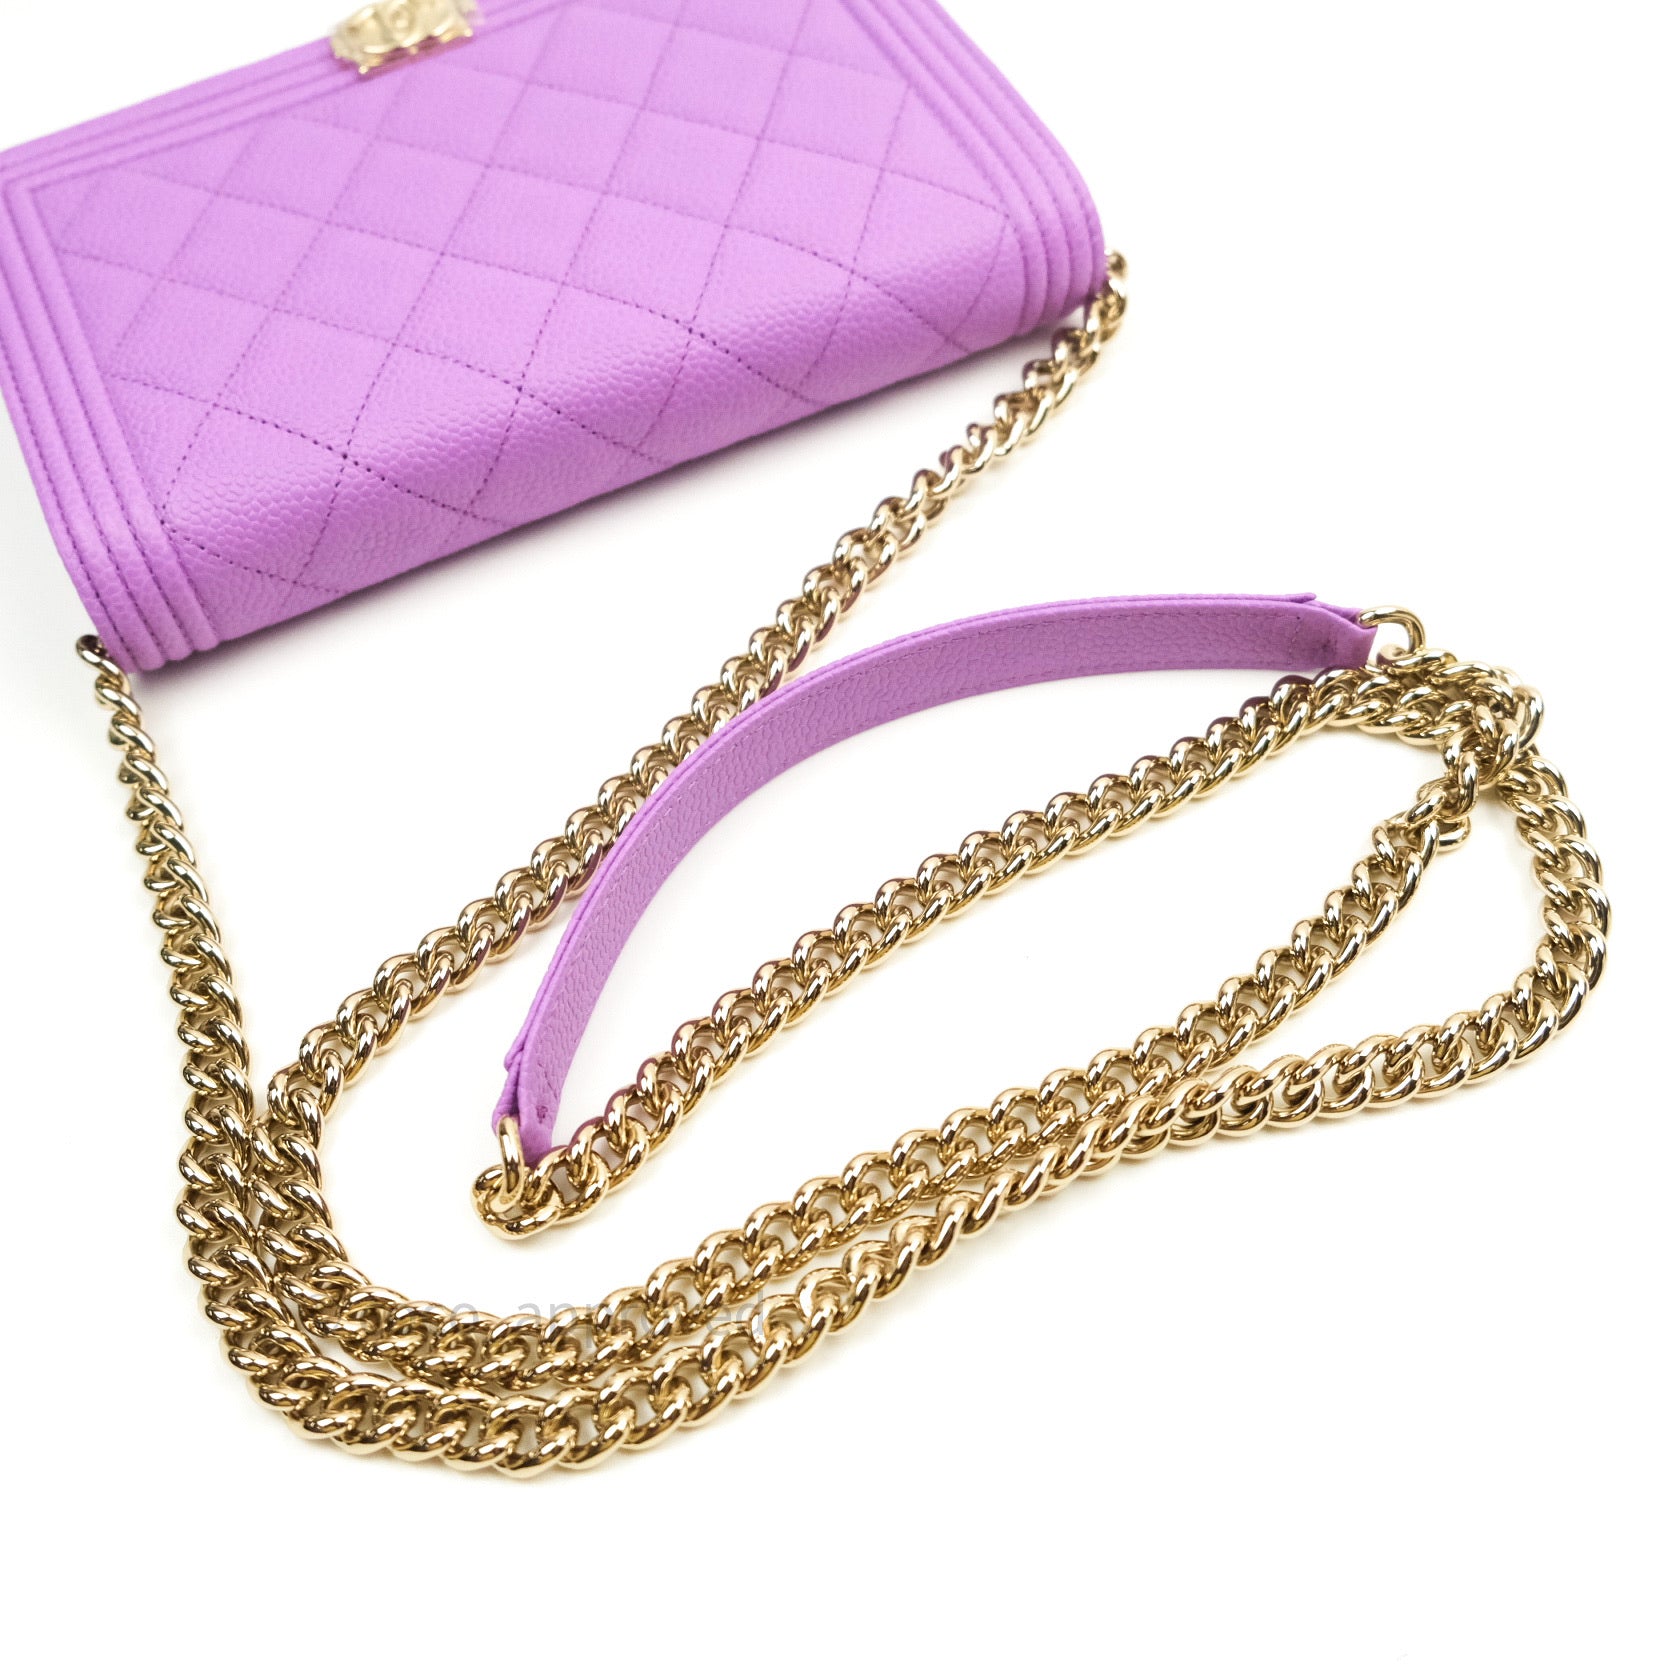 Chanel - Authenticated Wallet on Chain Boy Half Flap Handbag - Patent Leather Purple Plain for Women, Very Good Condition